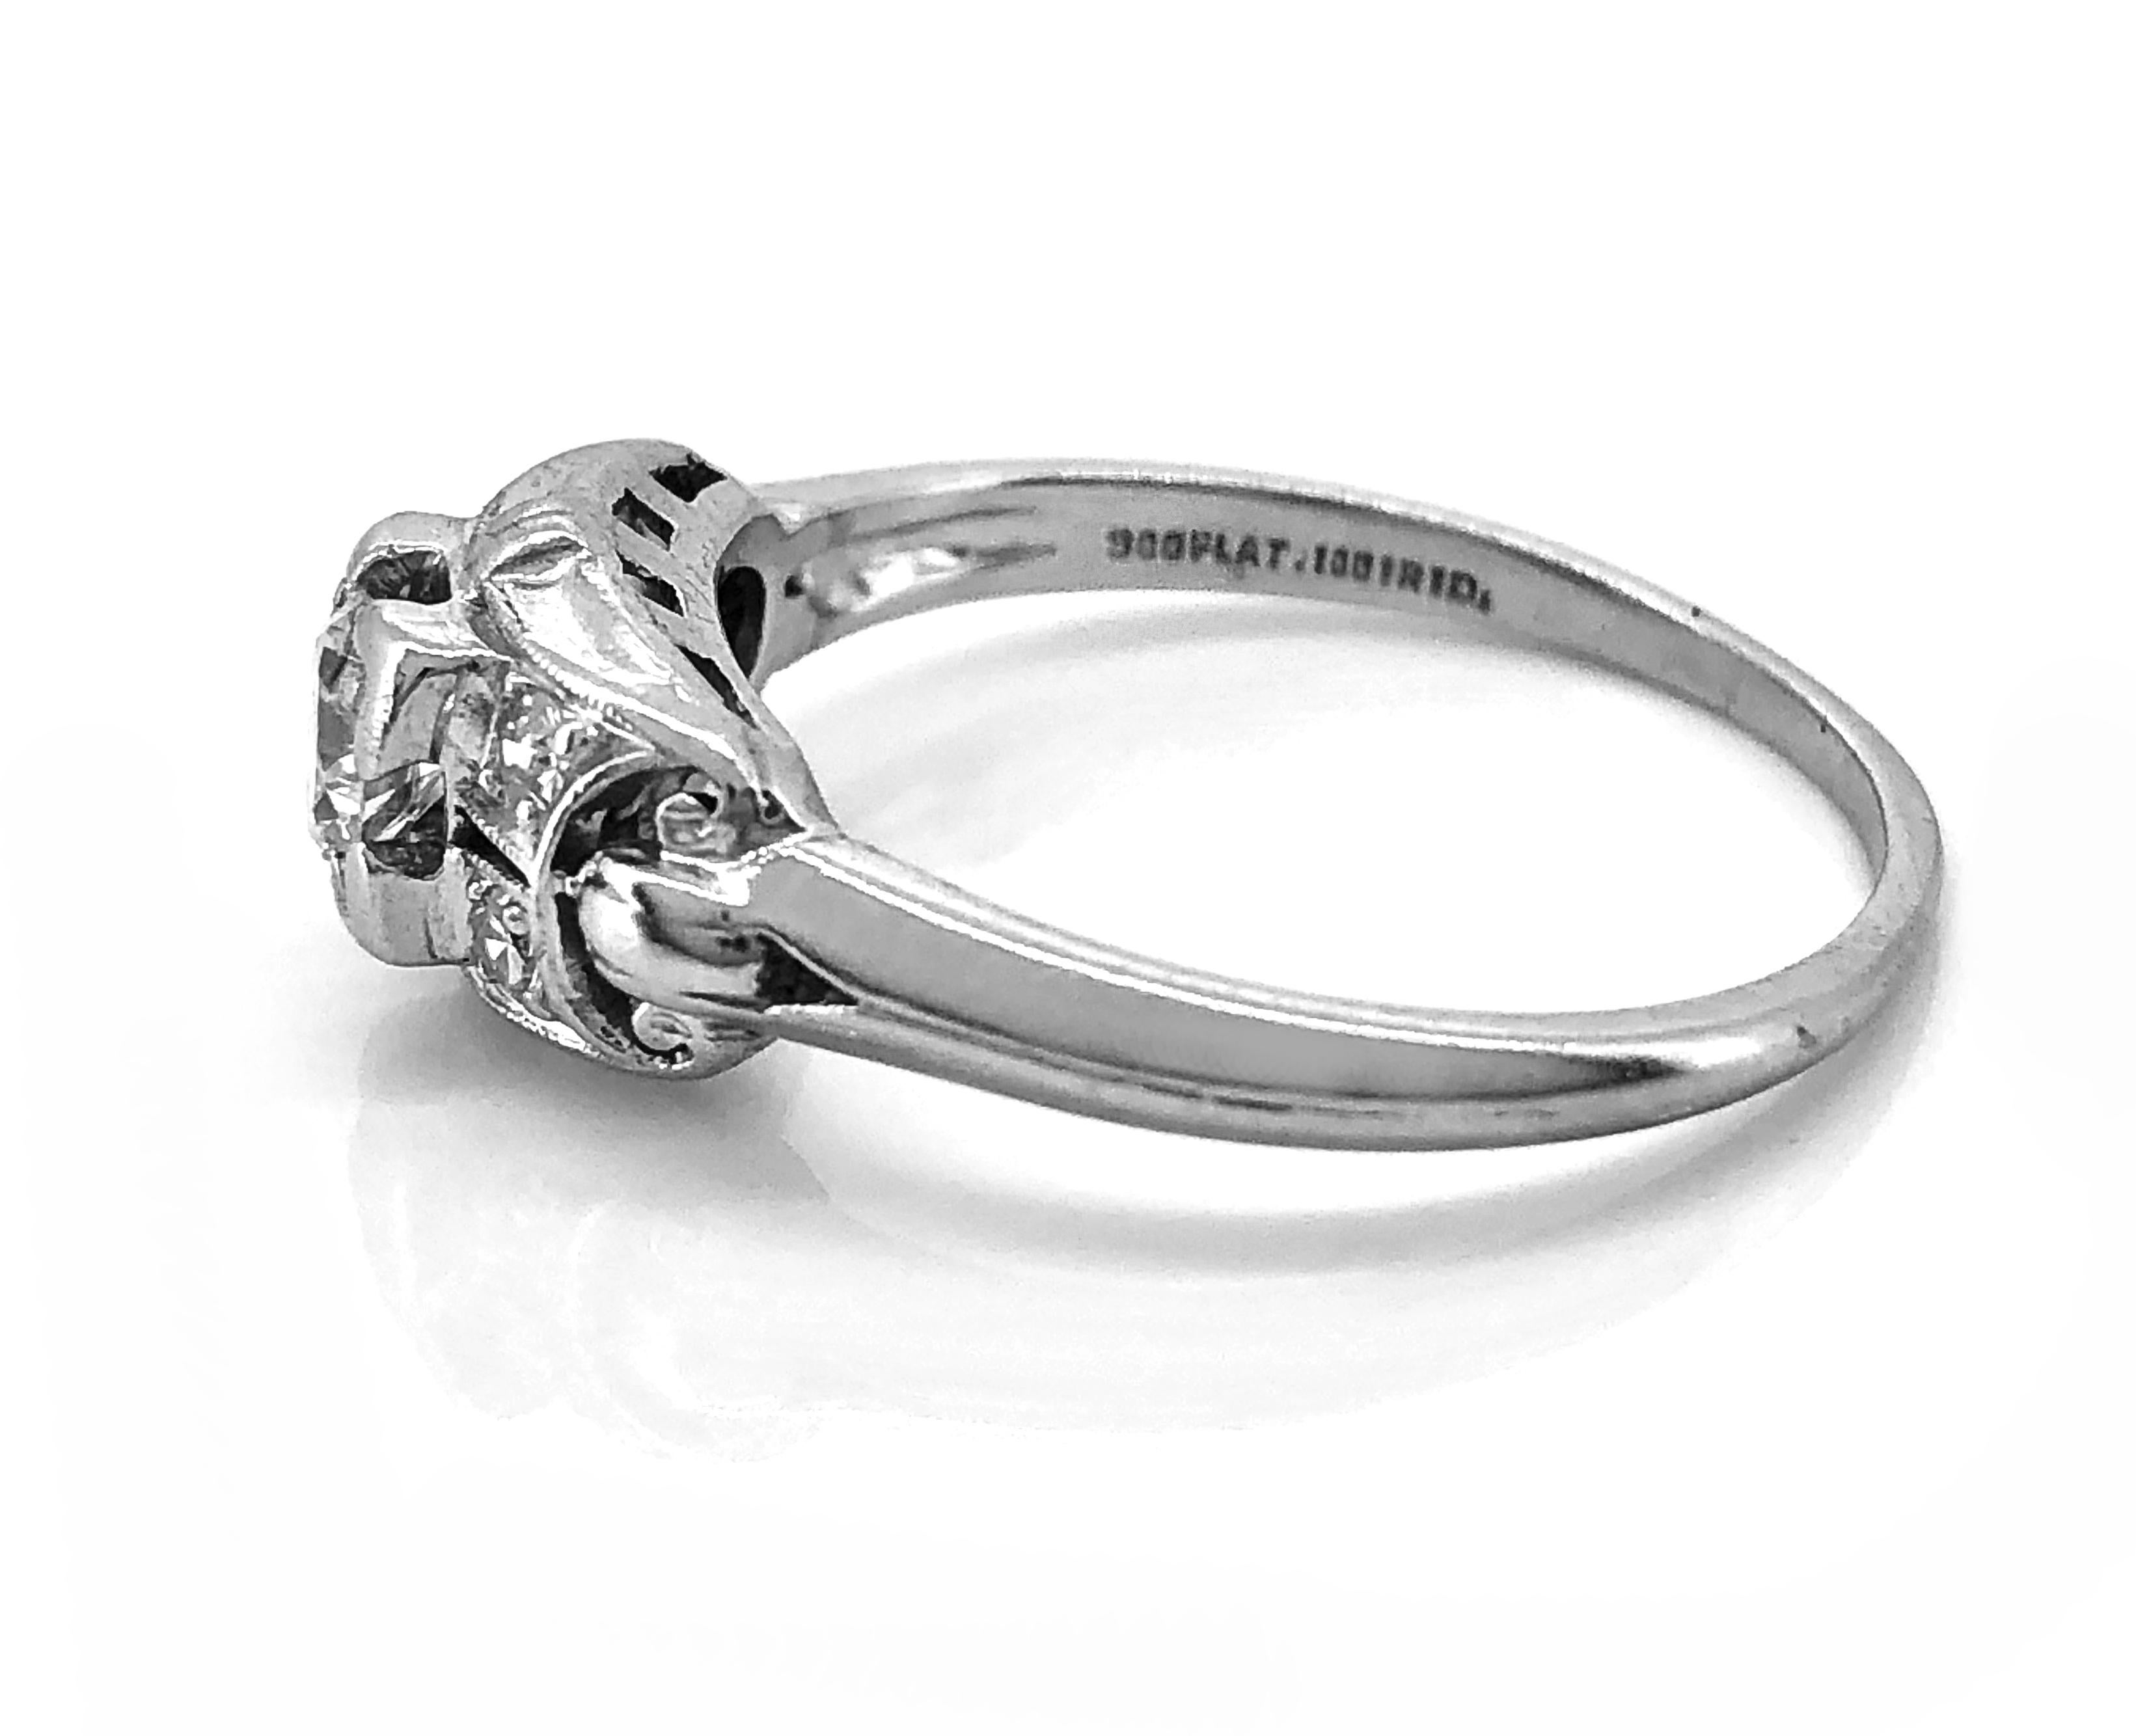 A beautiful Art Deco diamond Antique engagement ring features a .26ct. Apx. Transitional cut diamond with VS1 clarity and G color. The accenting Single cut diamonds weigh .10ct. Apx. T.W. with VS1-VS2 clarity and F-G color. This is a decorative